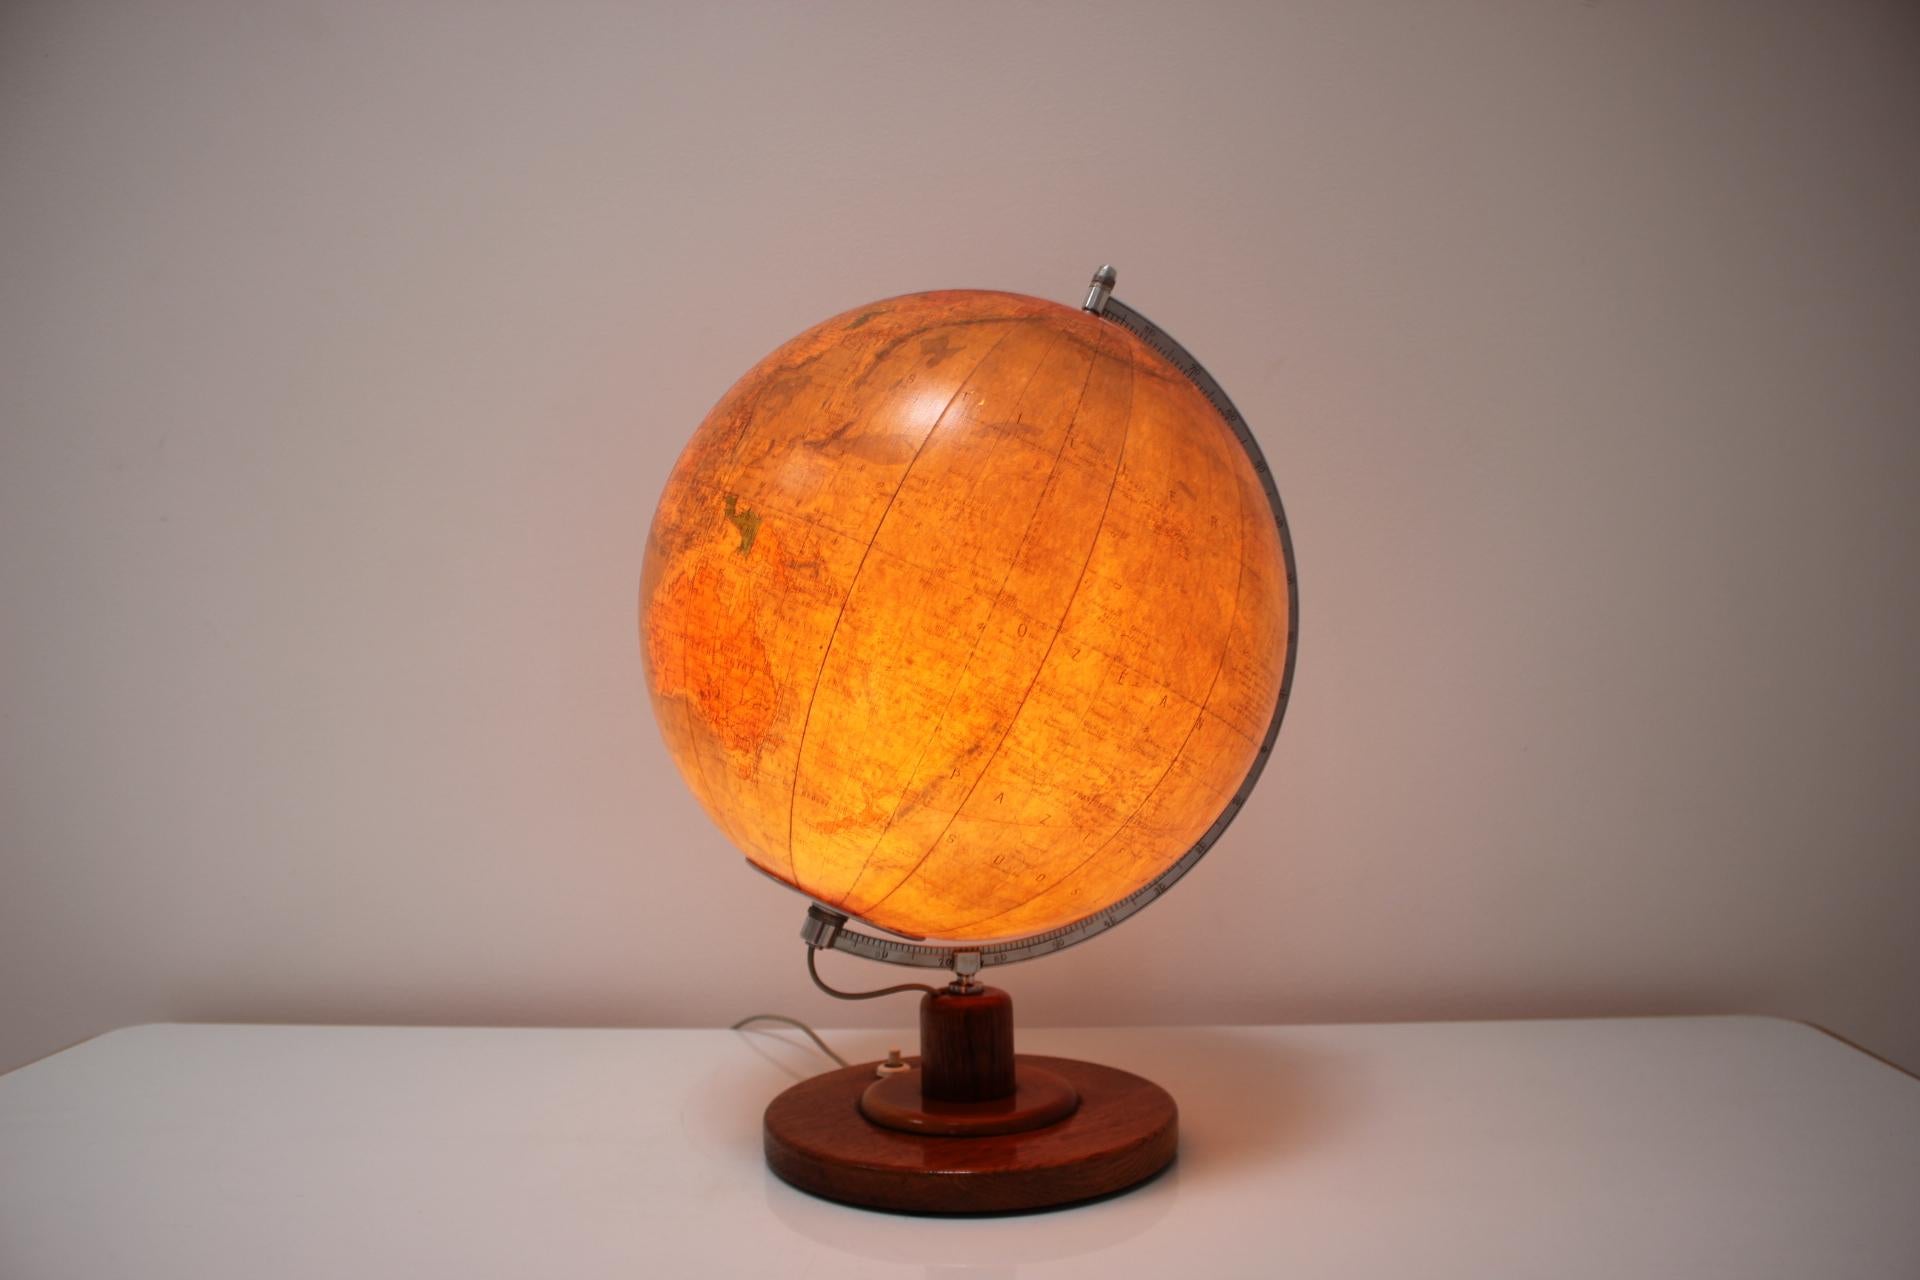 Mid-20th Century Mid-Century Light Glass Globe with Wooden Base by Paul Rath, 1950s For Sale